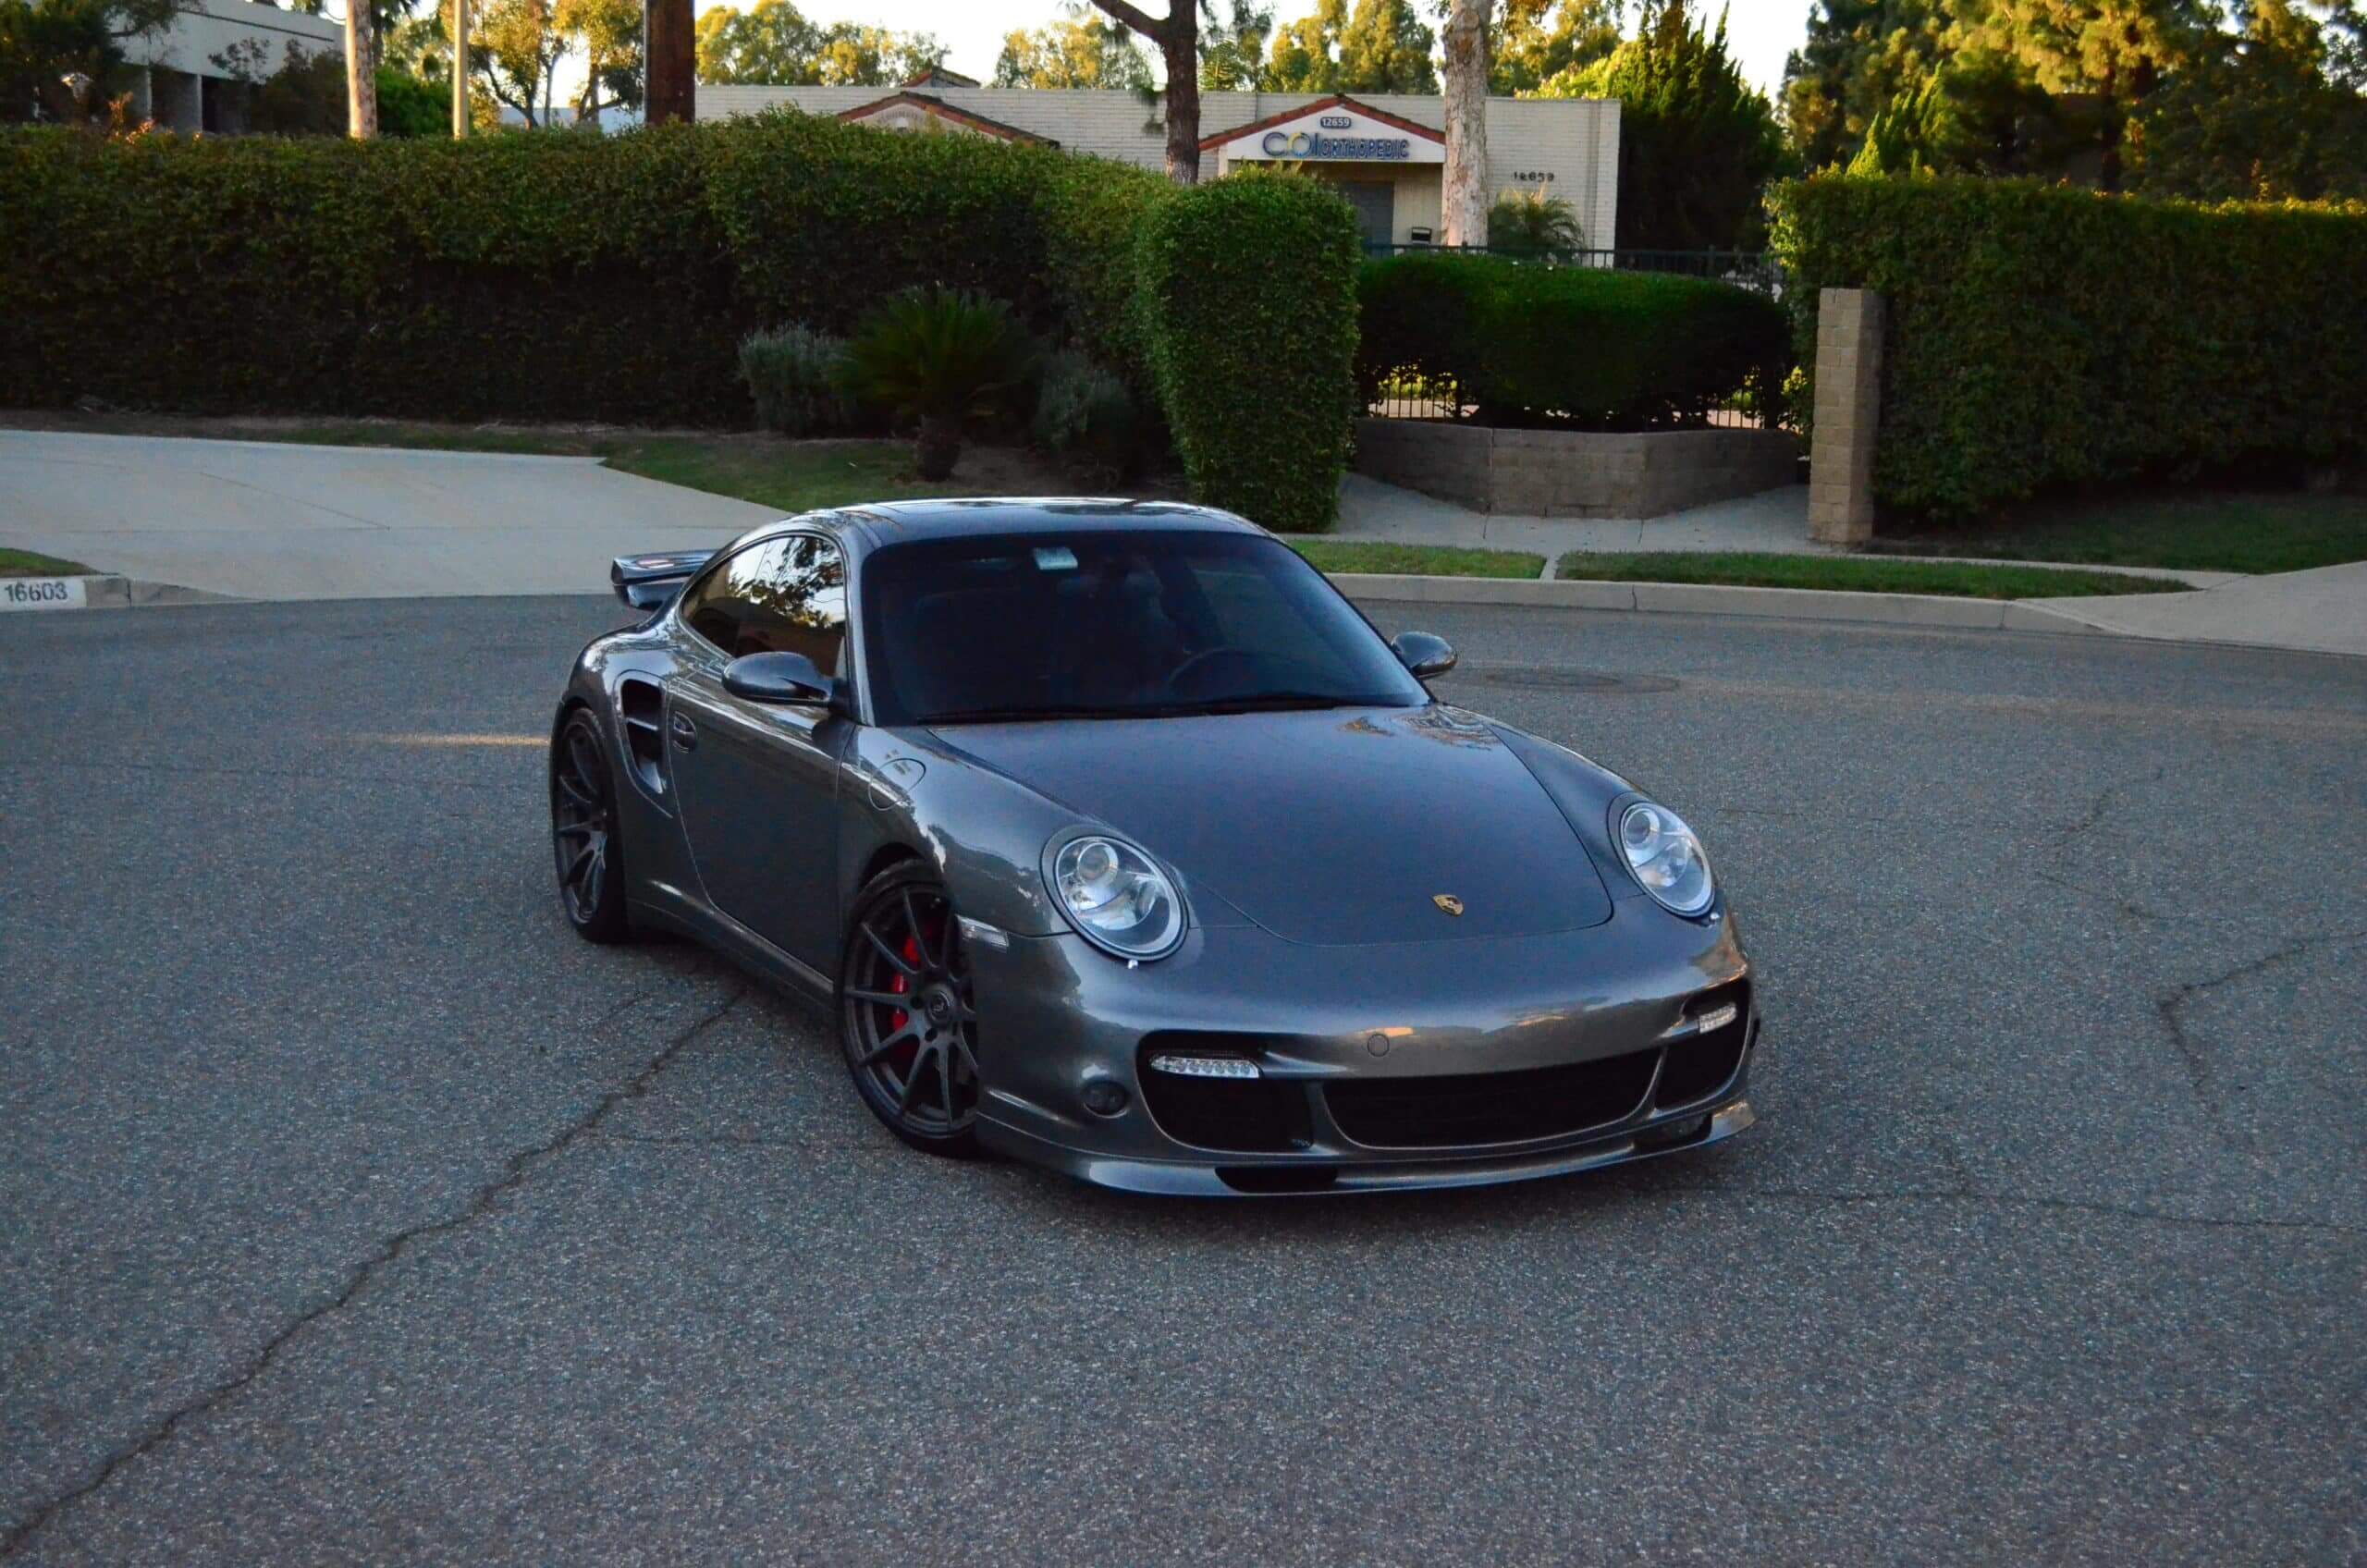 A beautiful shot on this Porsche 911 Turbo S after a Maintenance detail.